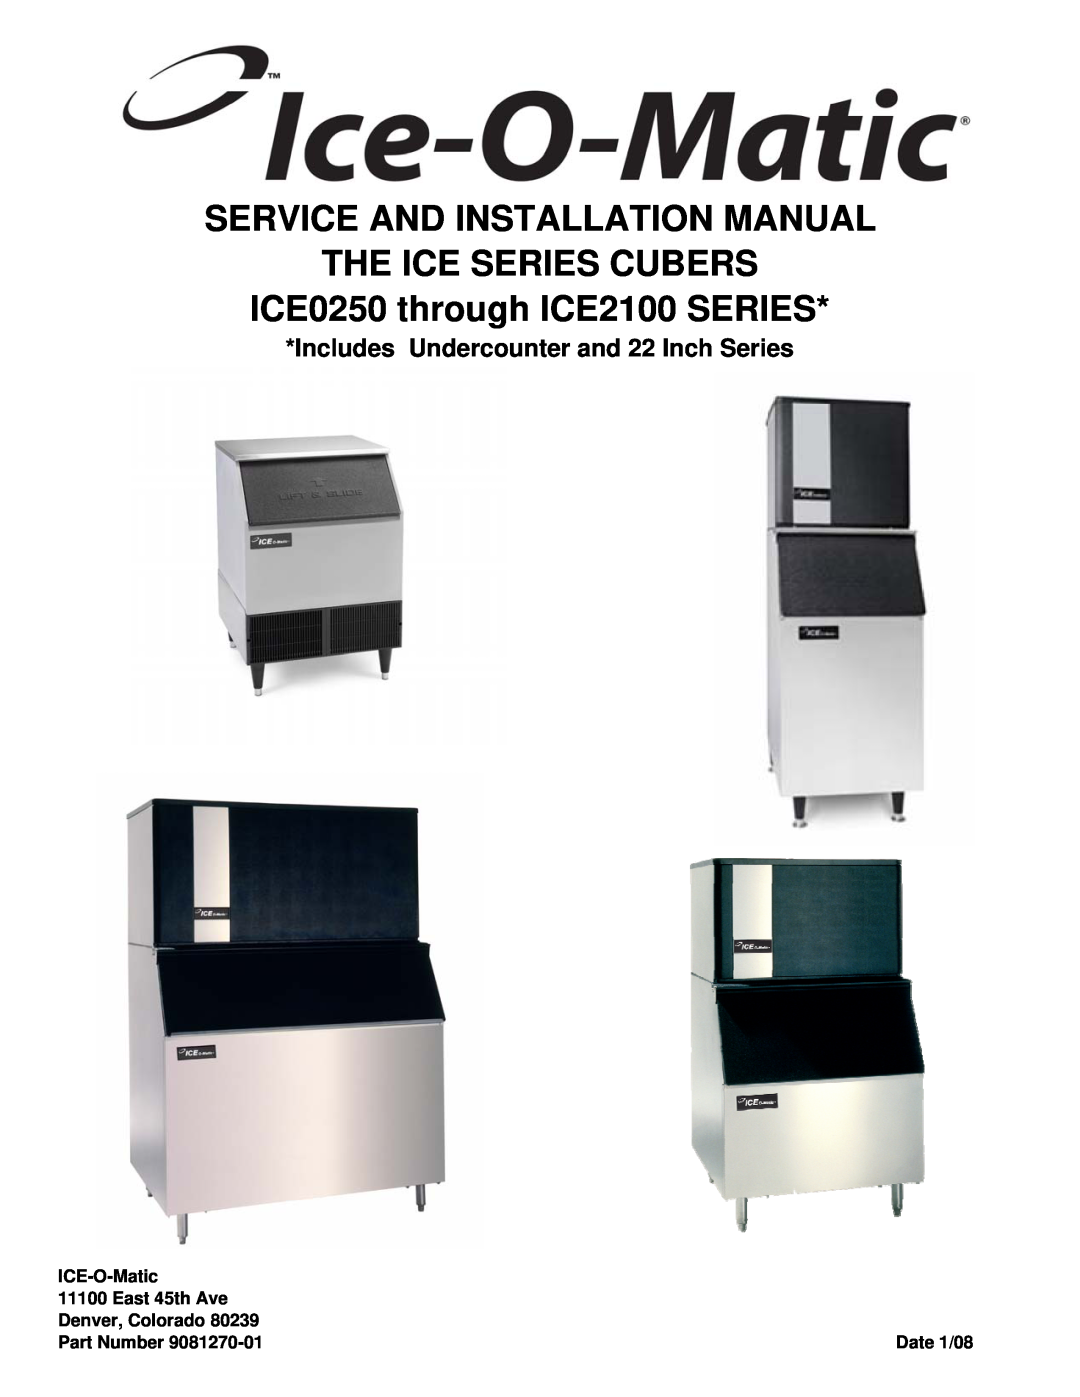 Ice-O-Matic ICE0250 Series installation manual Includes Undercounter and 22 Inch Series, ICE0250 through ICE2100 SERIES 